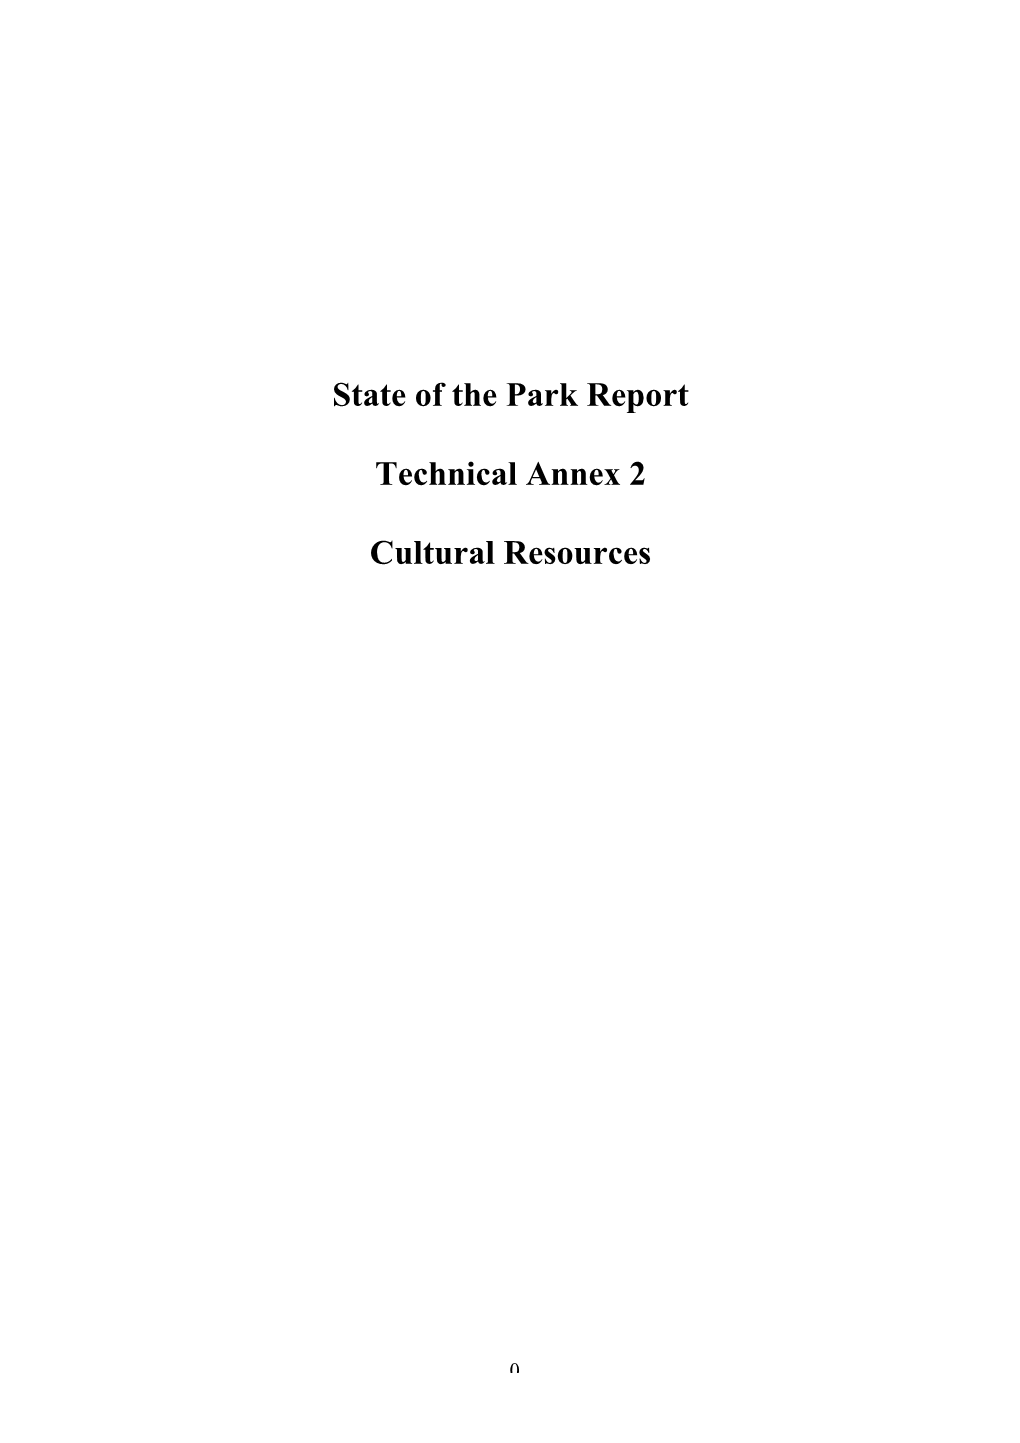 State of the Park Report Technical Annex 2 Cultural Resources